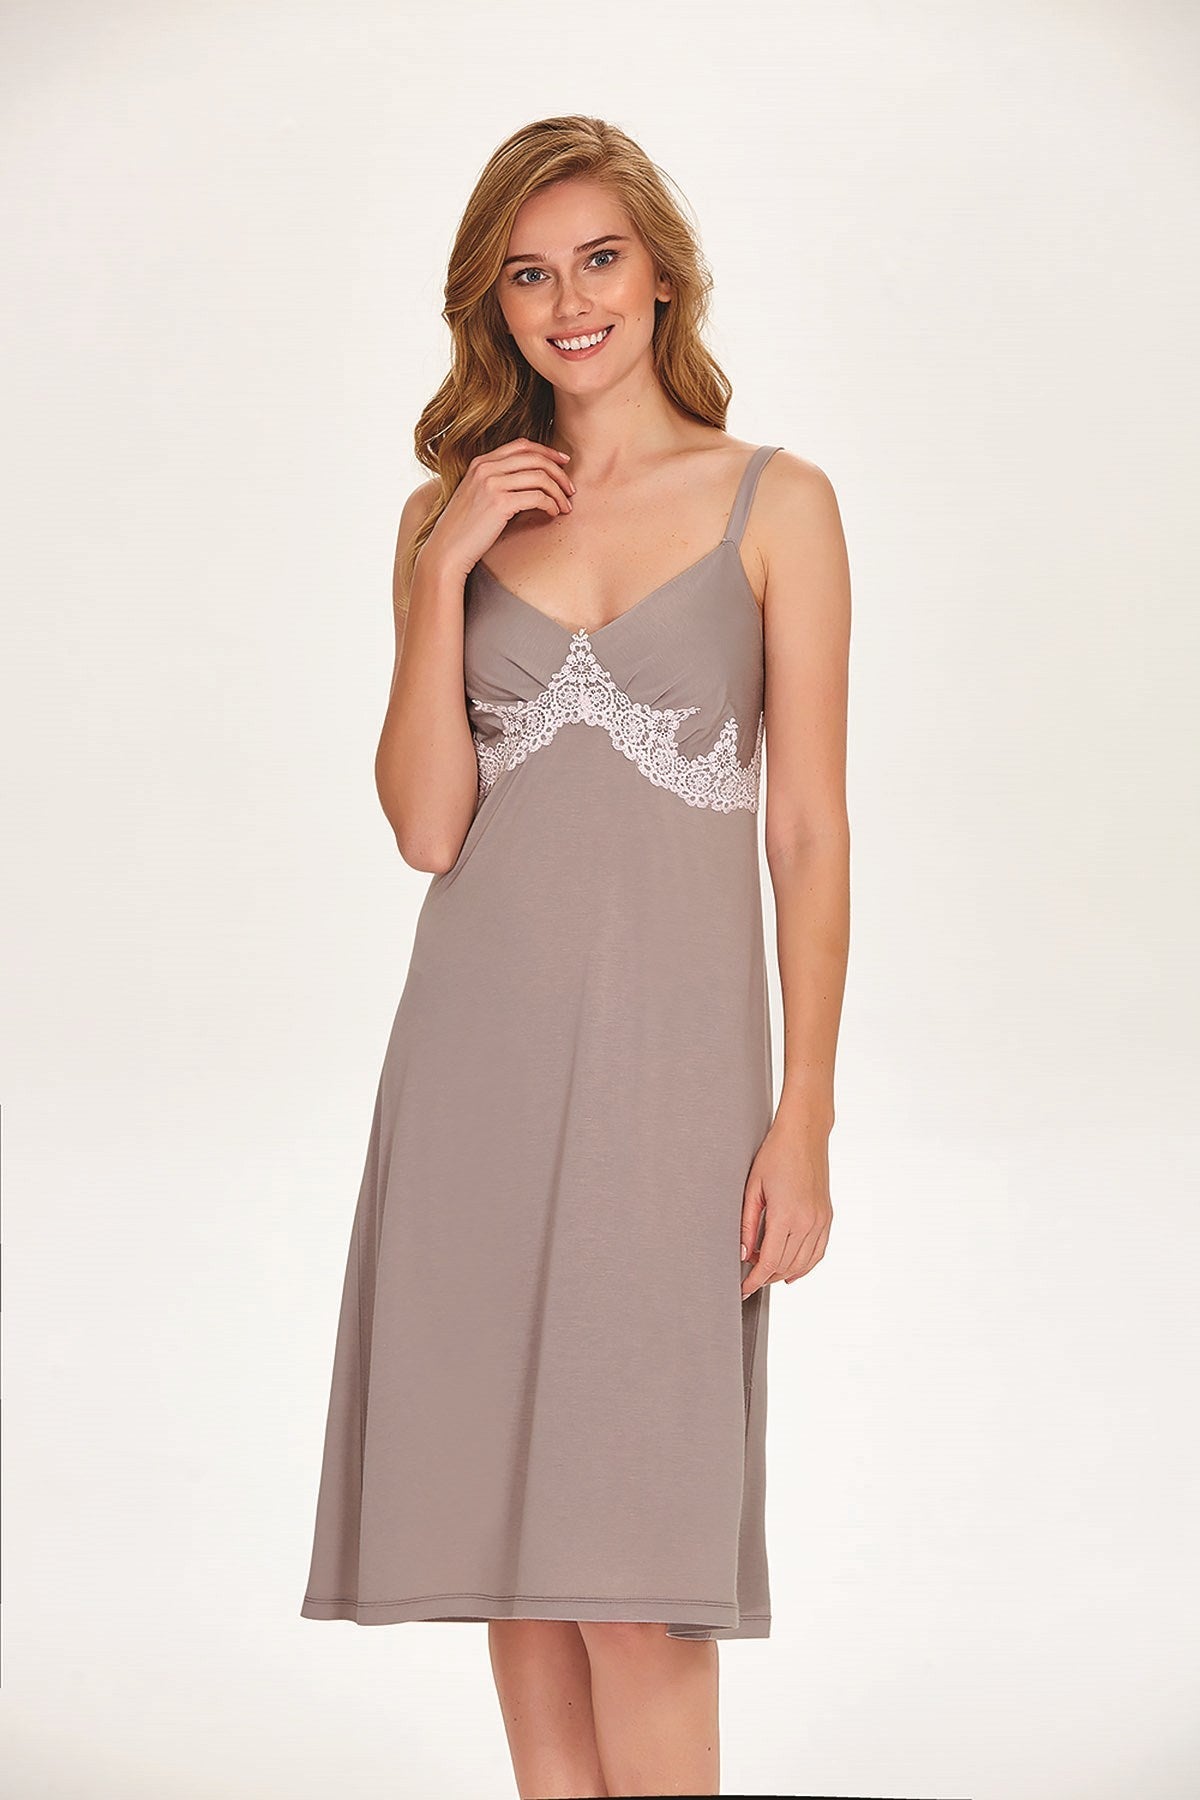 Shopymommy 6039 Rope Strap Lace Maternity Nursing Nightgown, 55% OFF